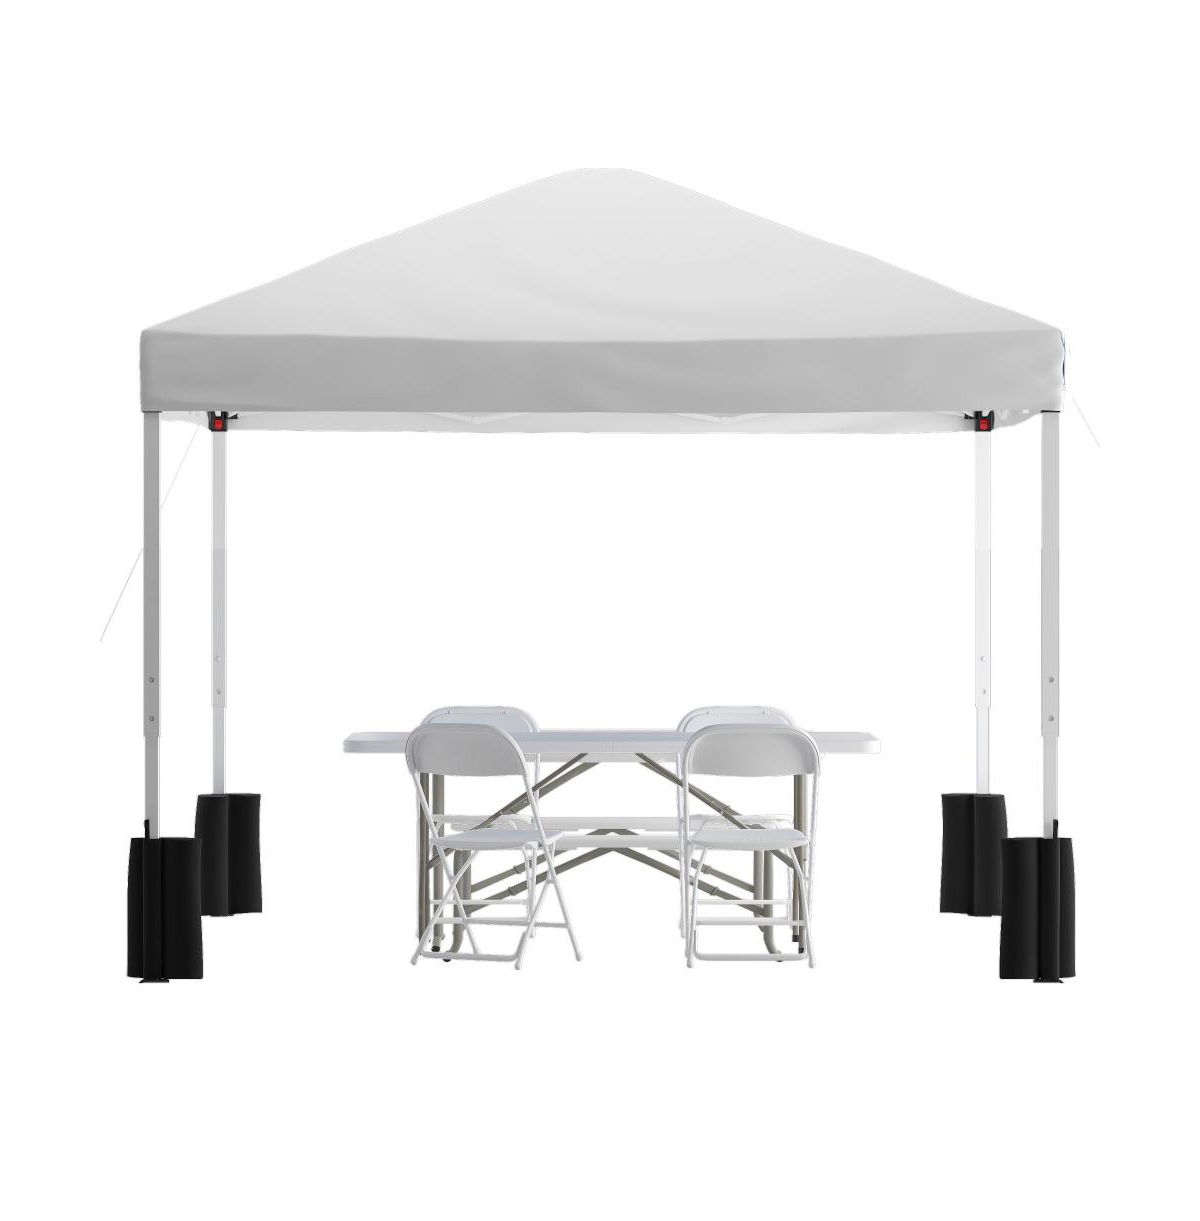 Outdoor Event/Tailgate Set With Pop Up Event Canopy With Wheeled Case, Bi-Fold Table And 4 Folding Chairs - White